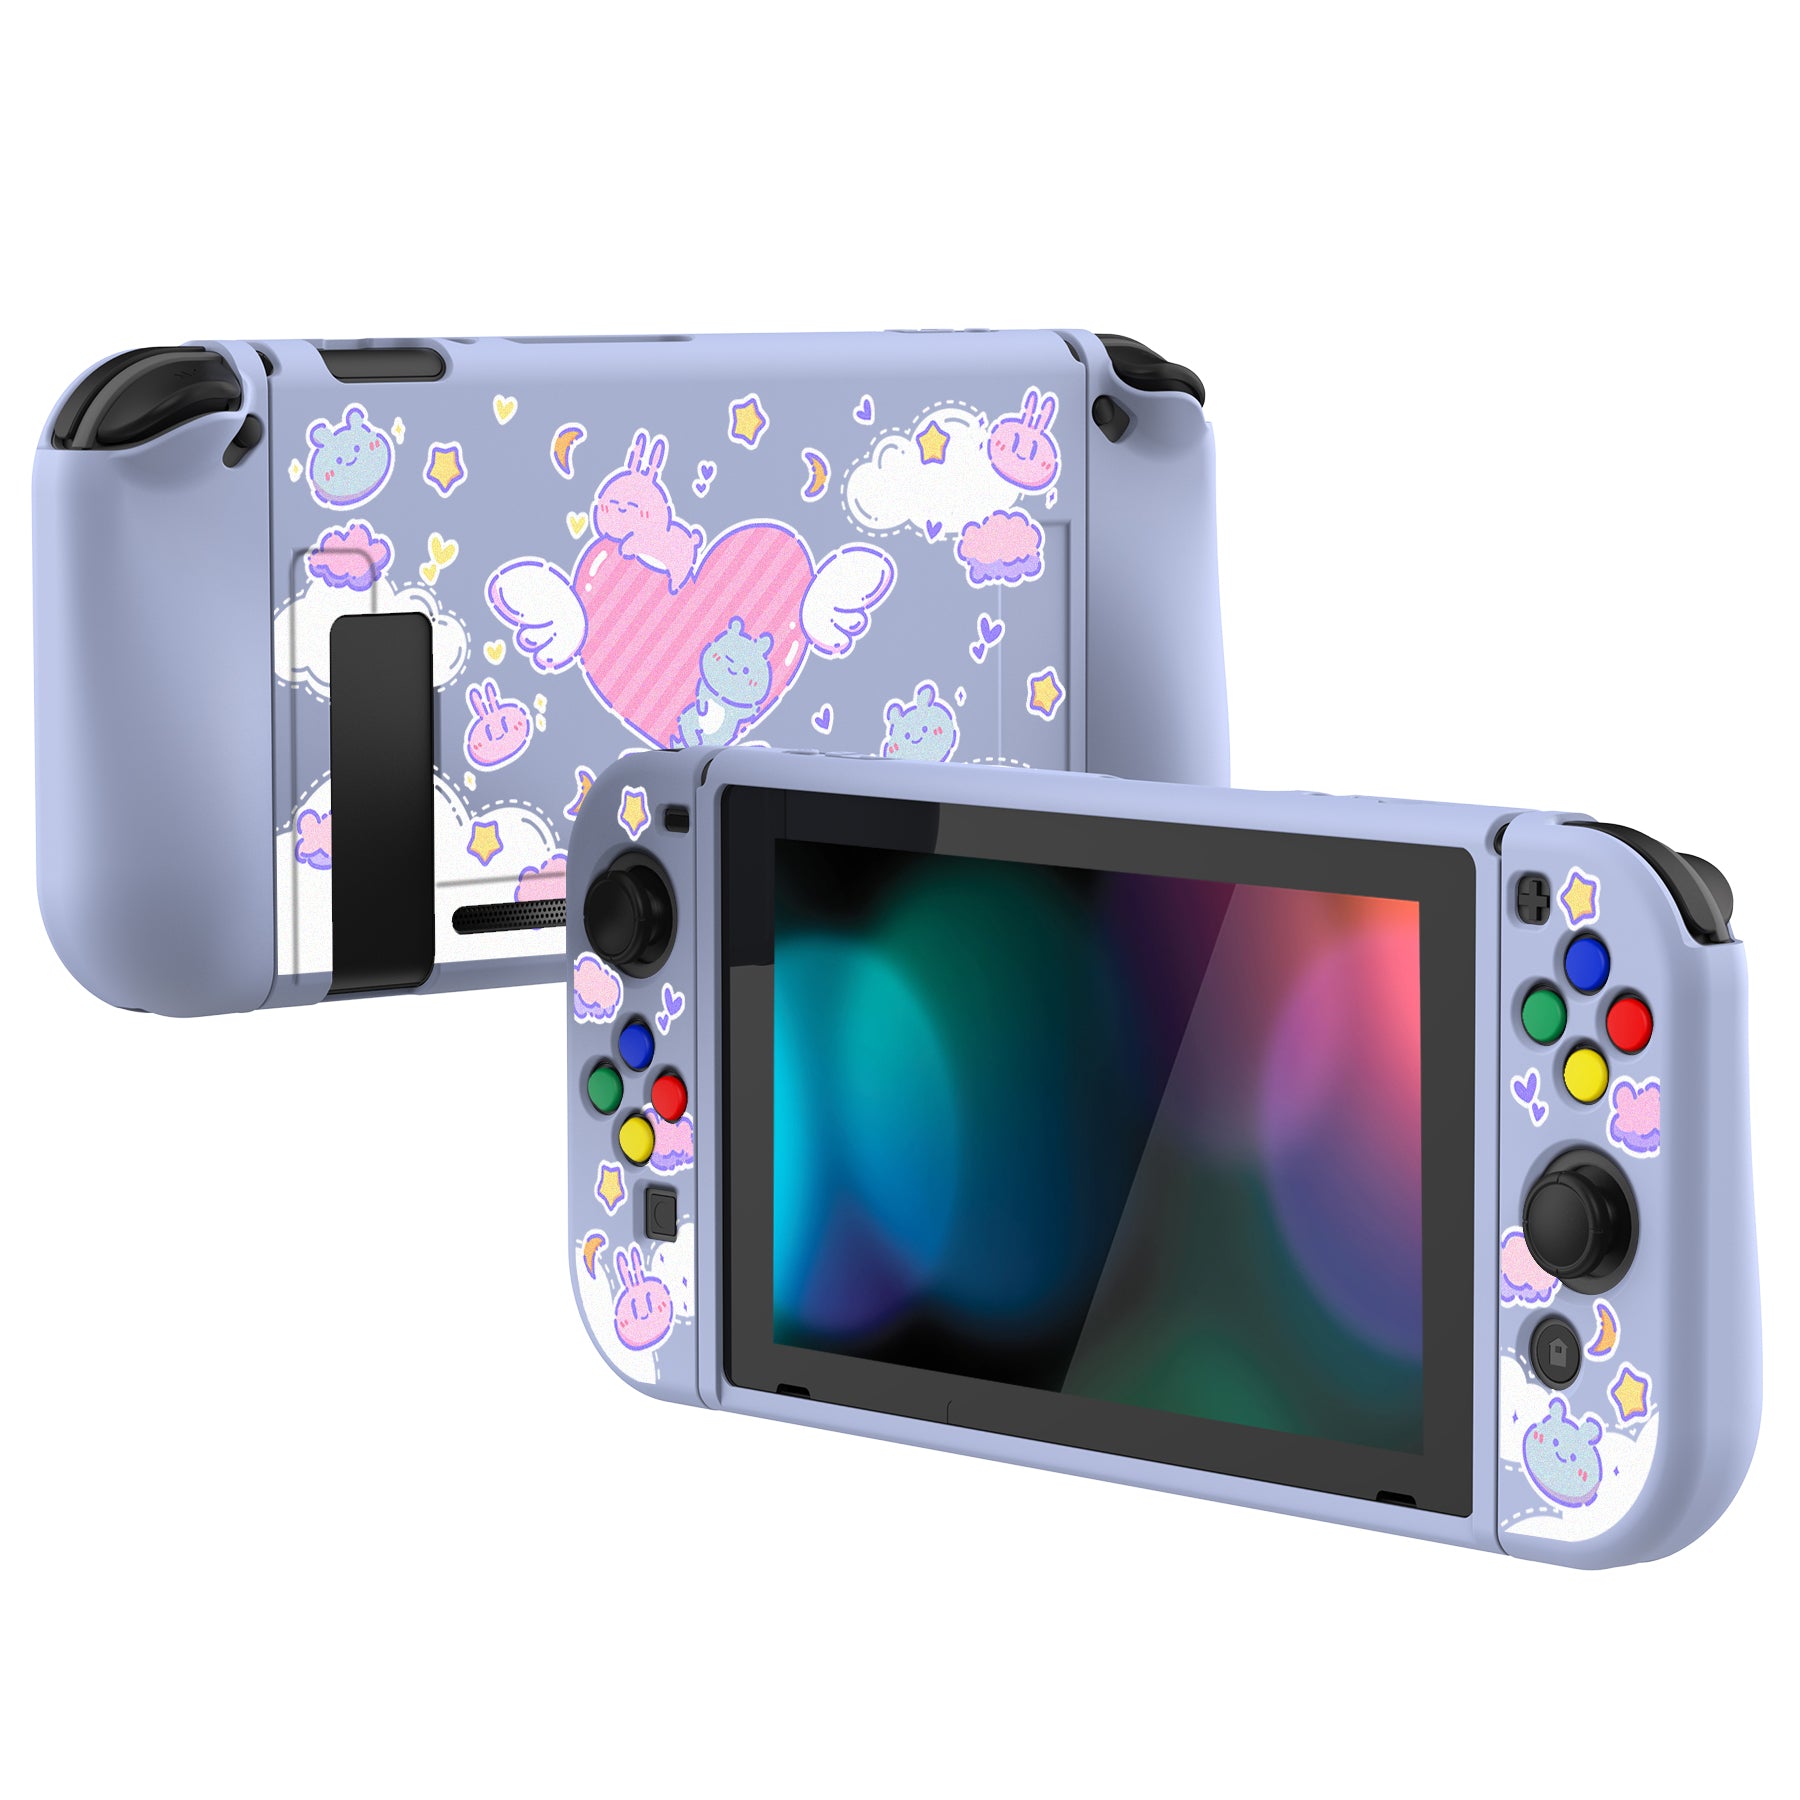 PlayVital Fantasy Bunny & Bear Protective Case for NS, Soft TPU Slim Case Cover for NS Joycon Console with Colorful ABXY Direction Button Caps - NTU6024G2 PlayVital